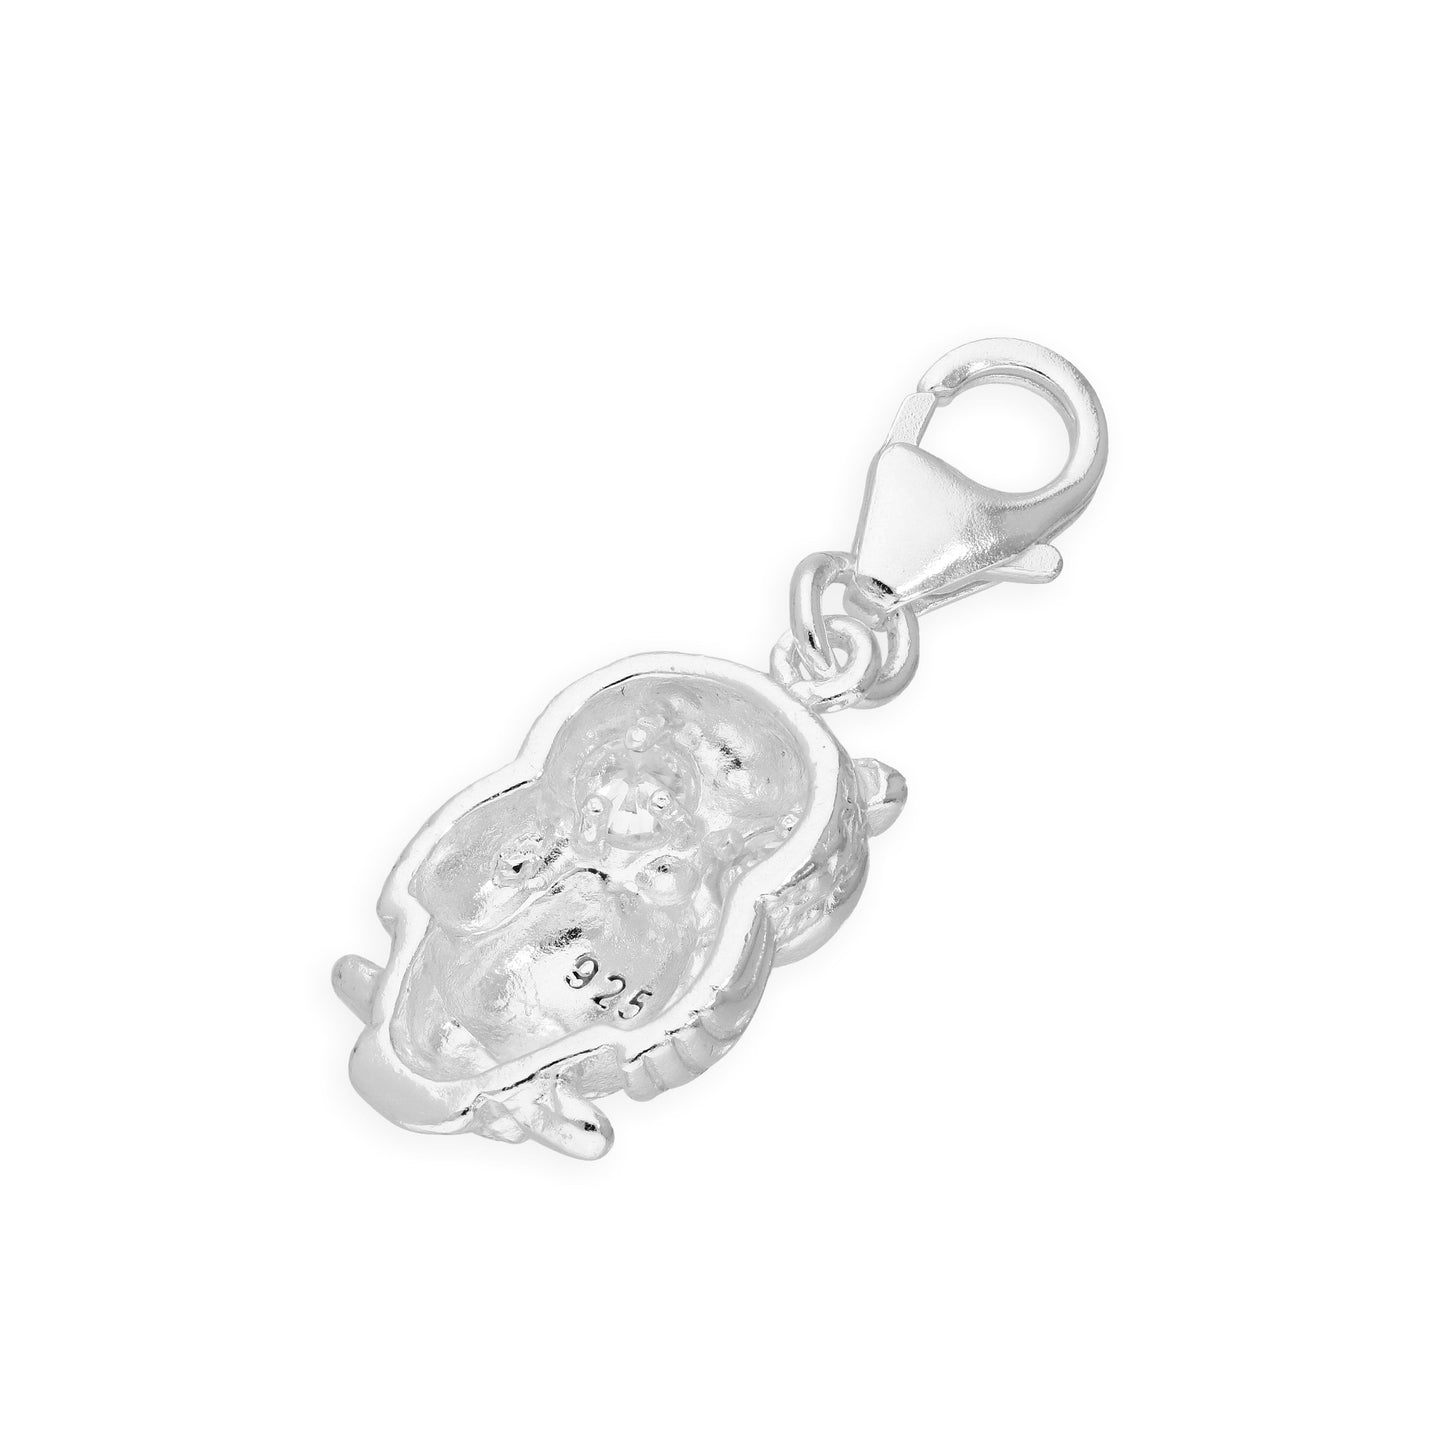 Sterling Silver & Crystal Owl Clip on Charm